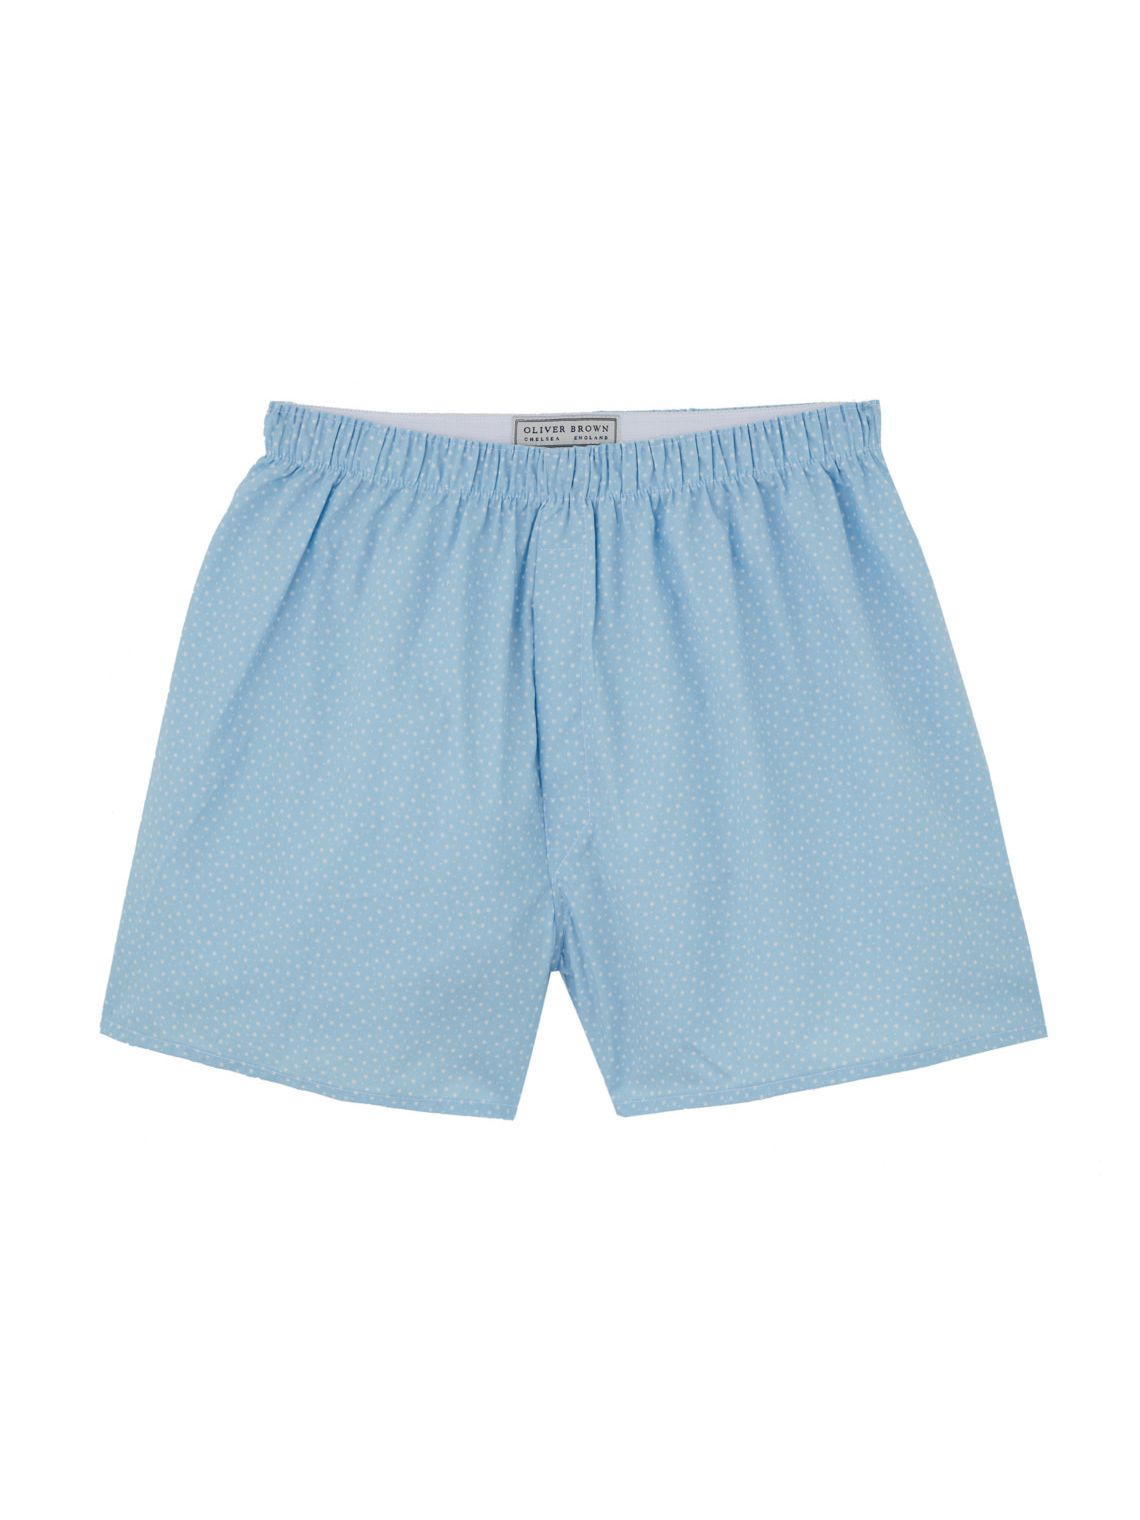 http://www.oliverbrown.org.uk/cdn/shop/products/CottonBoxerShorts_Stars-SkyBlue.jpg?v=1664369968